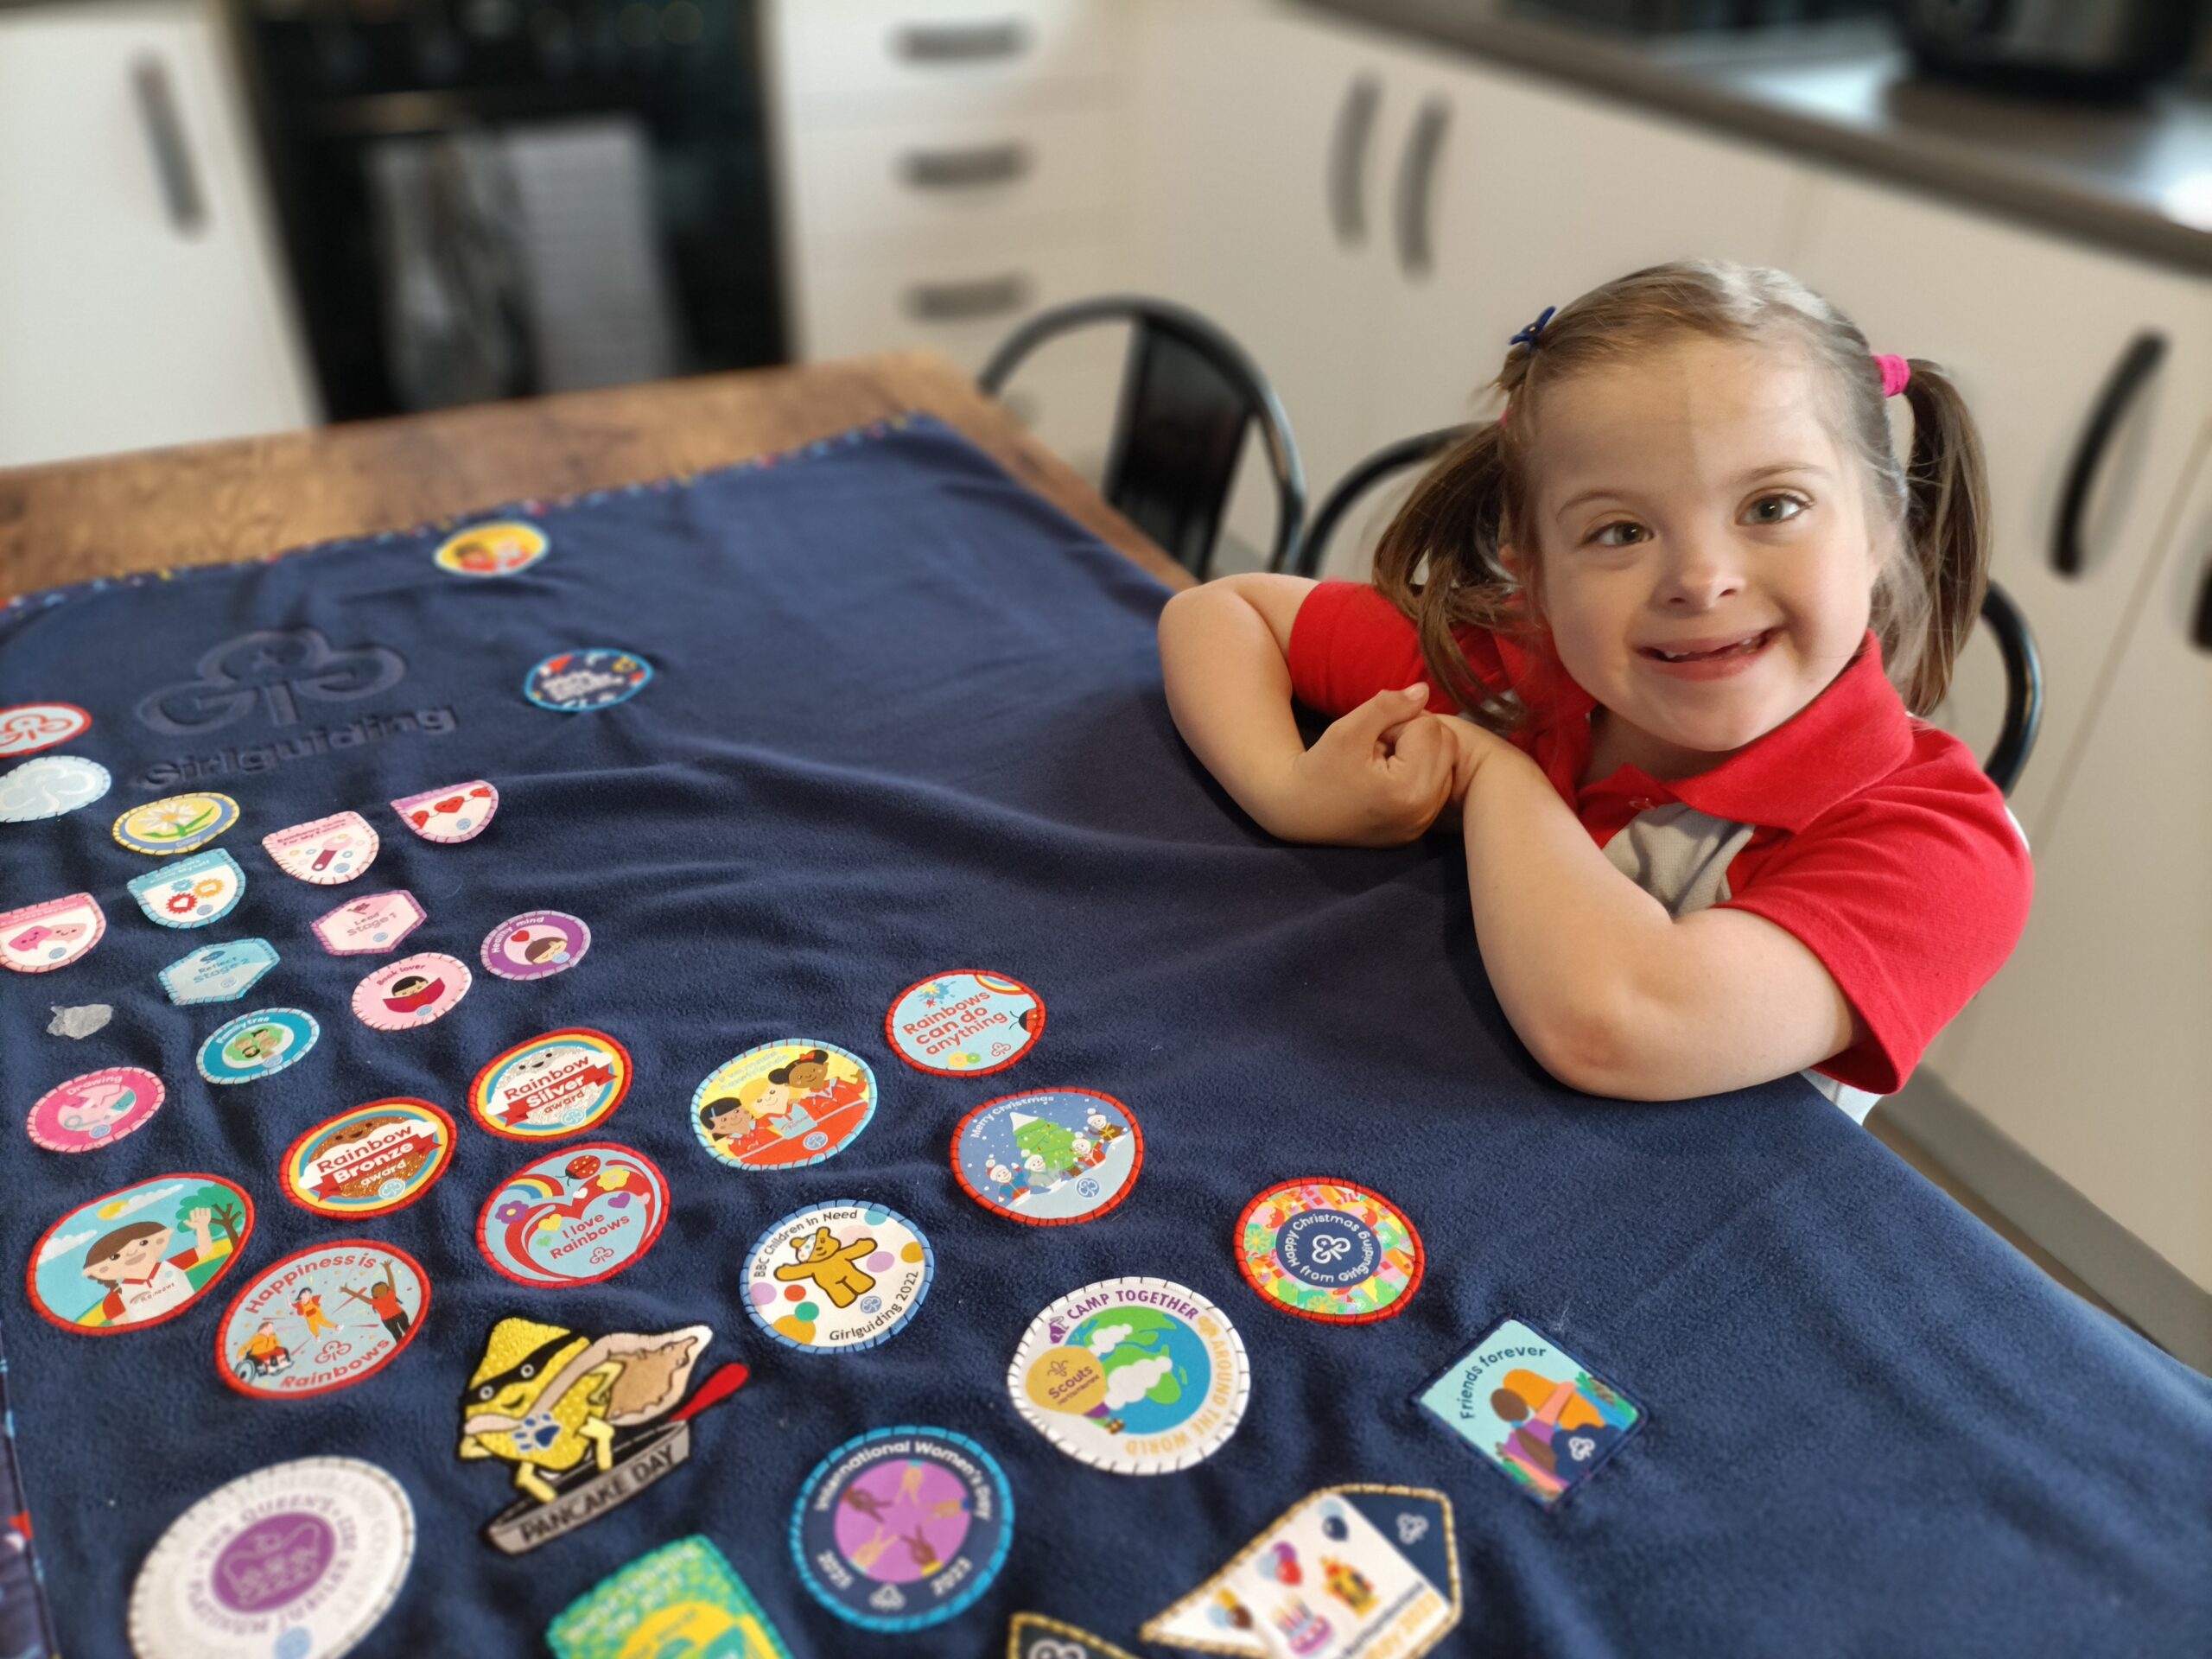 Girl smiling with rainbow badges on table